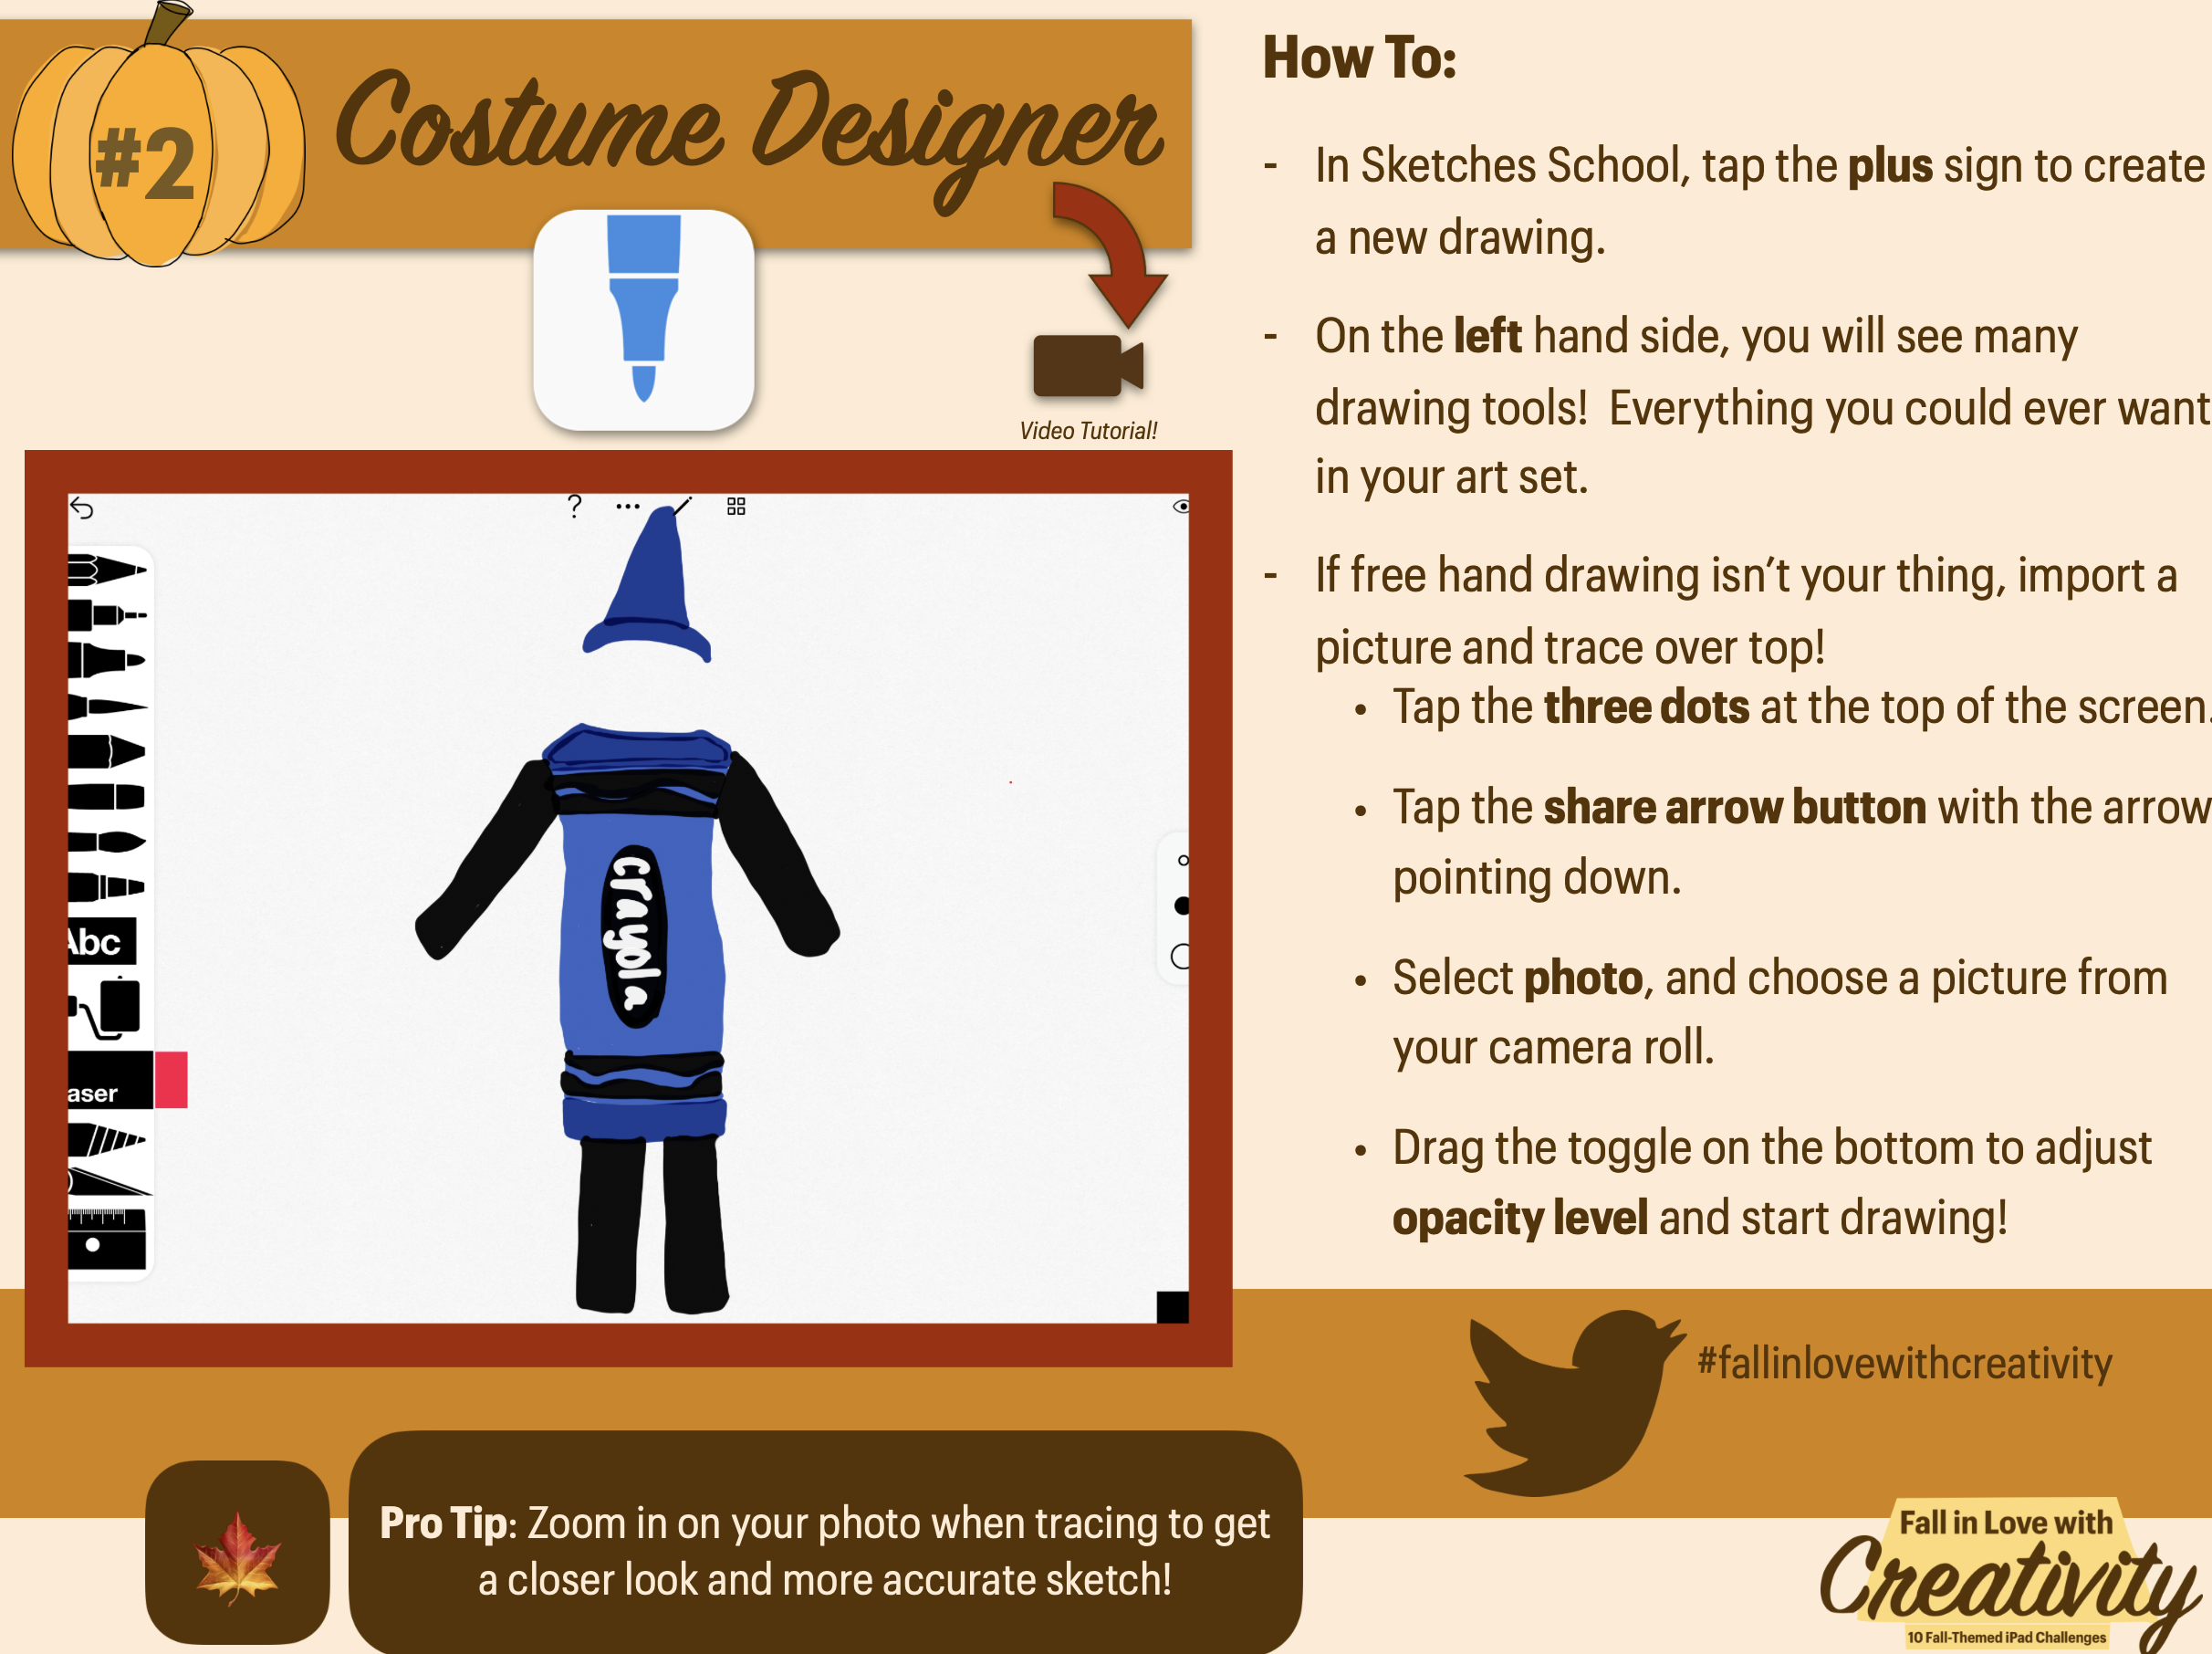 Design your own costume challenge using Sketches School